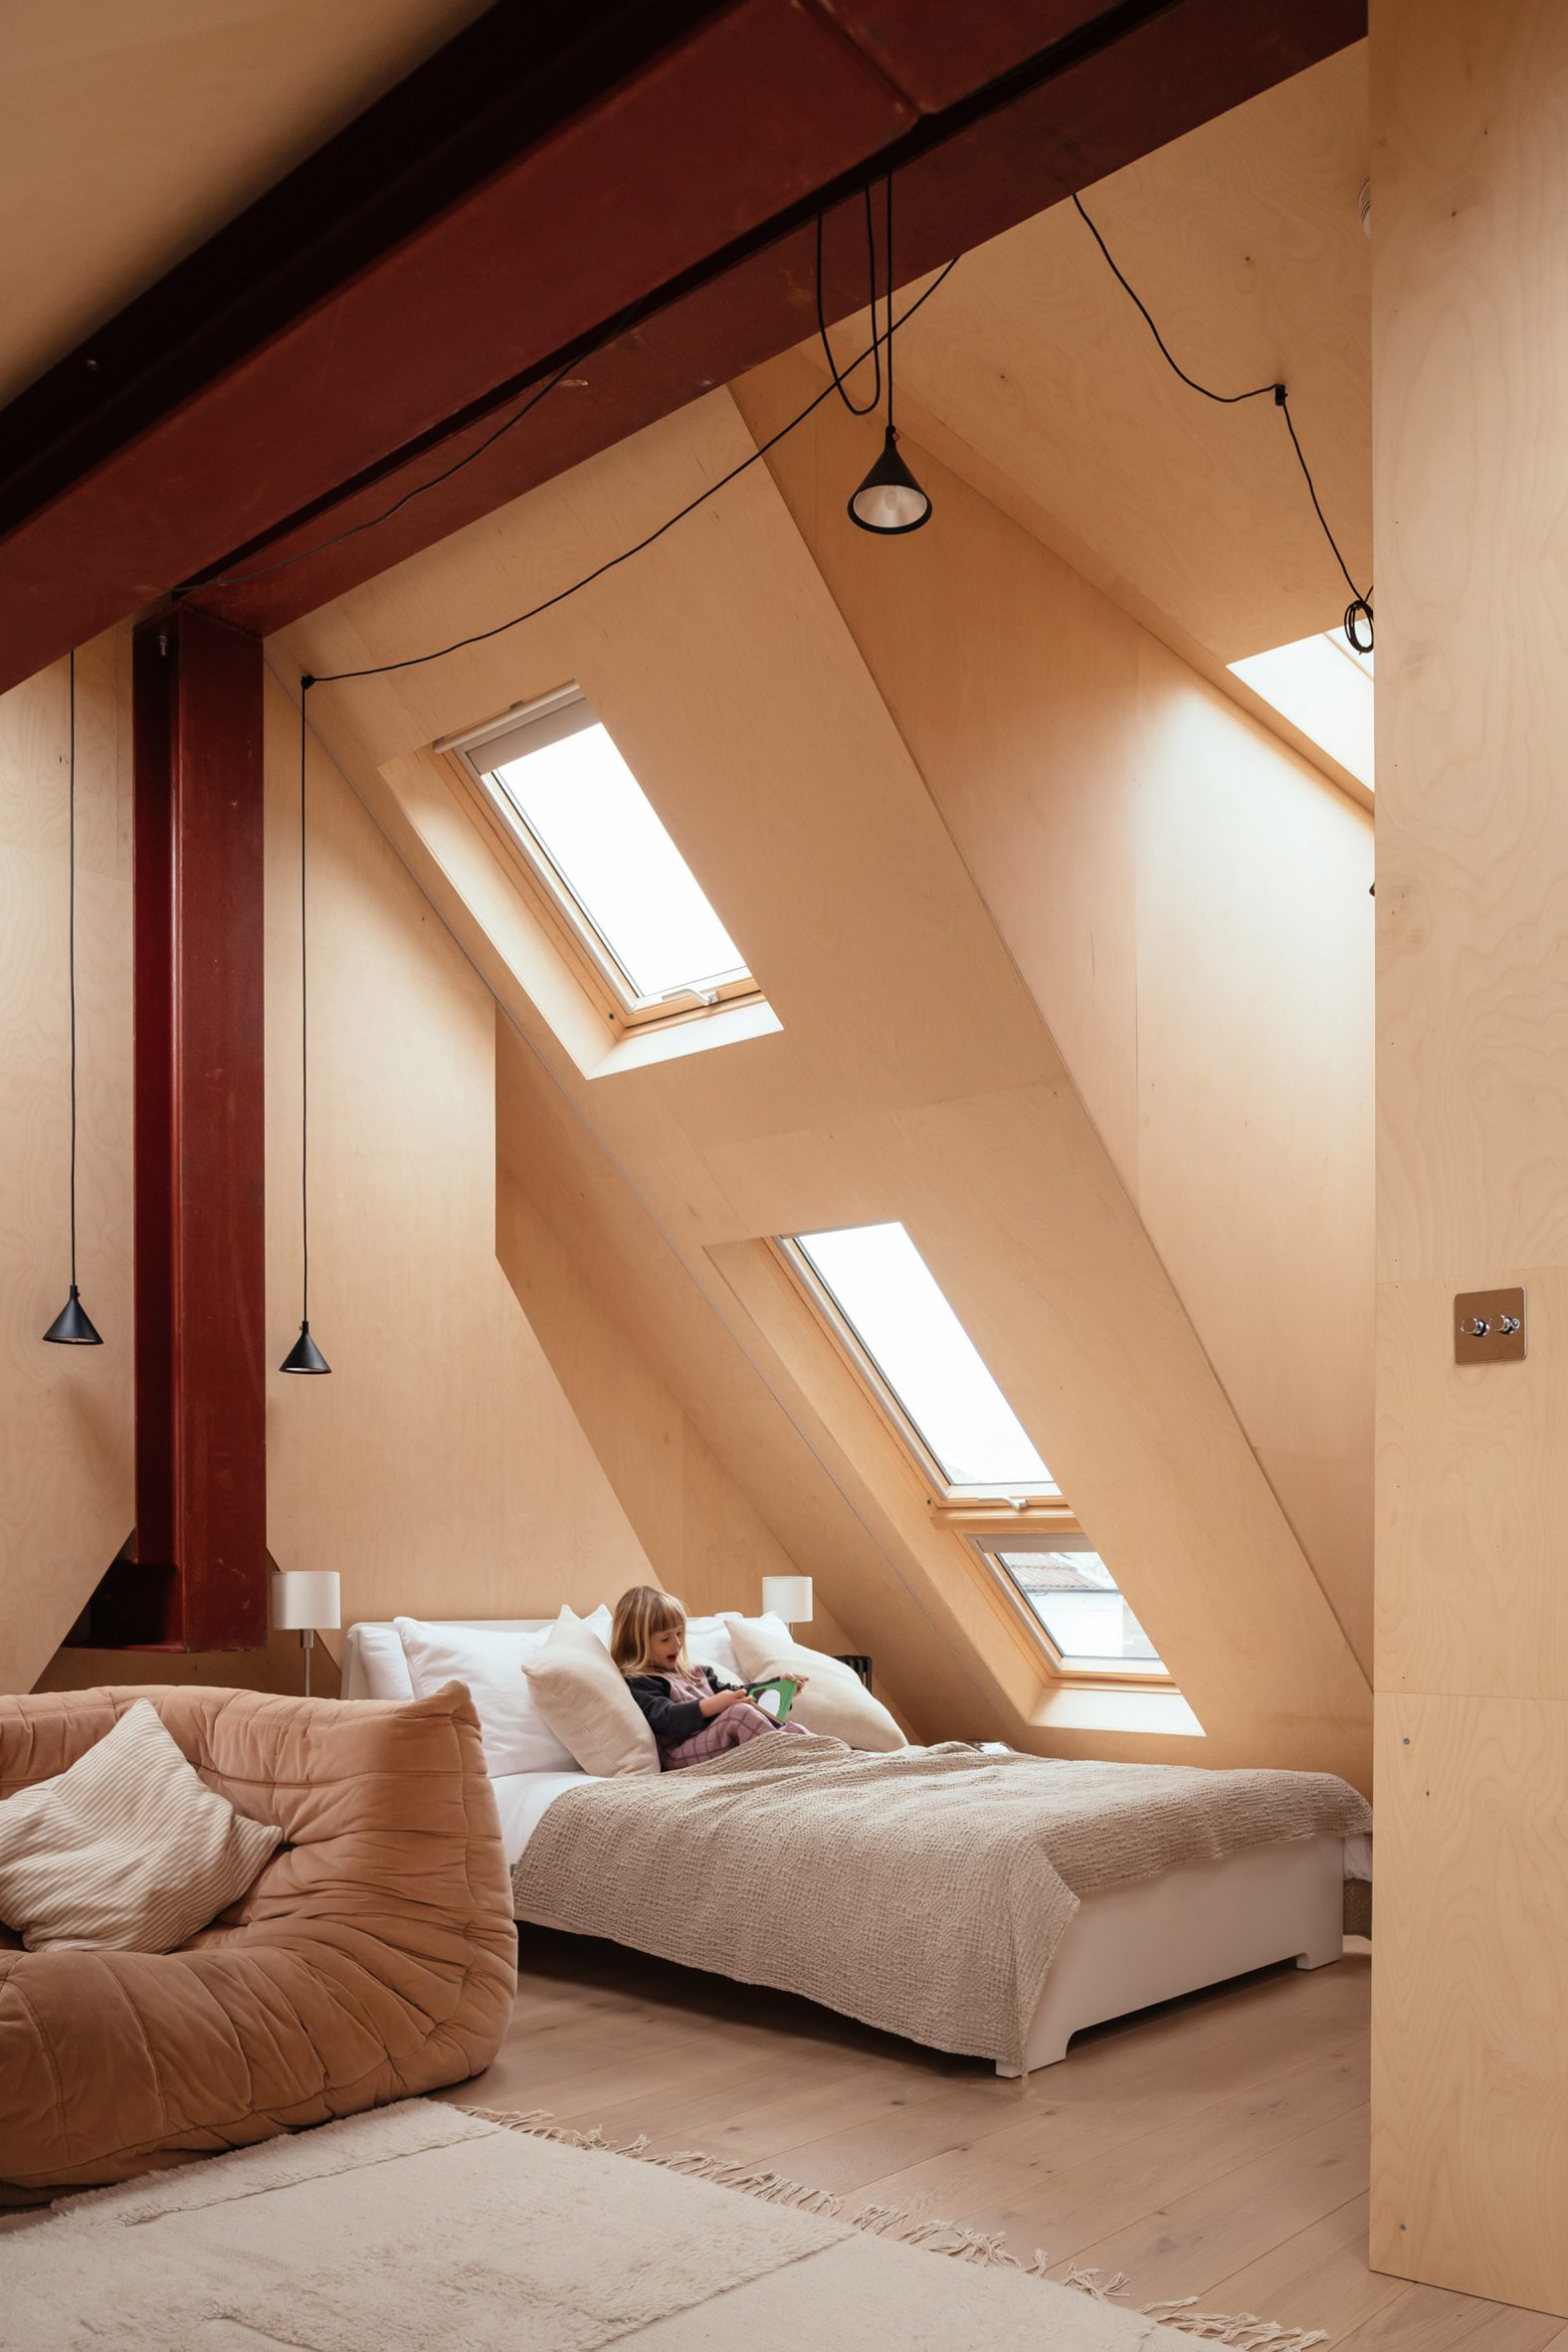 Velux windows line the sloping roof 